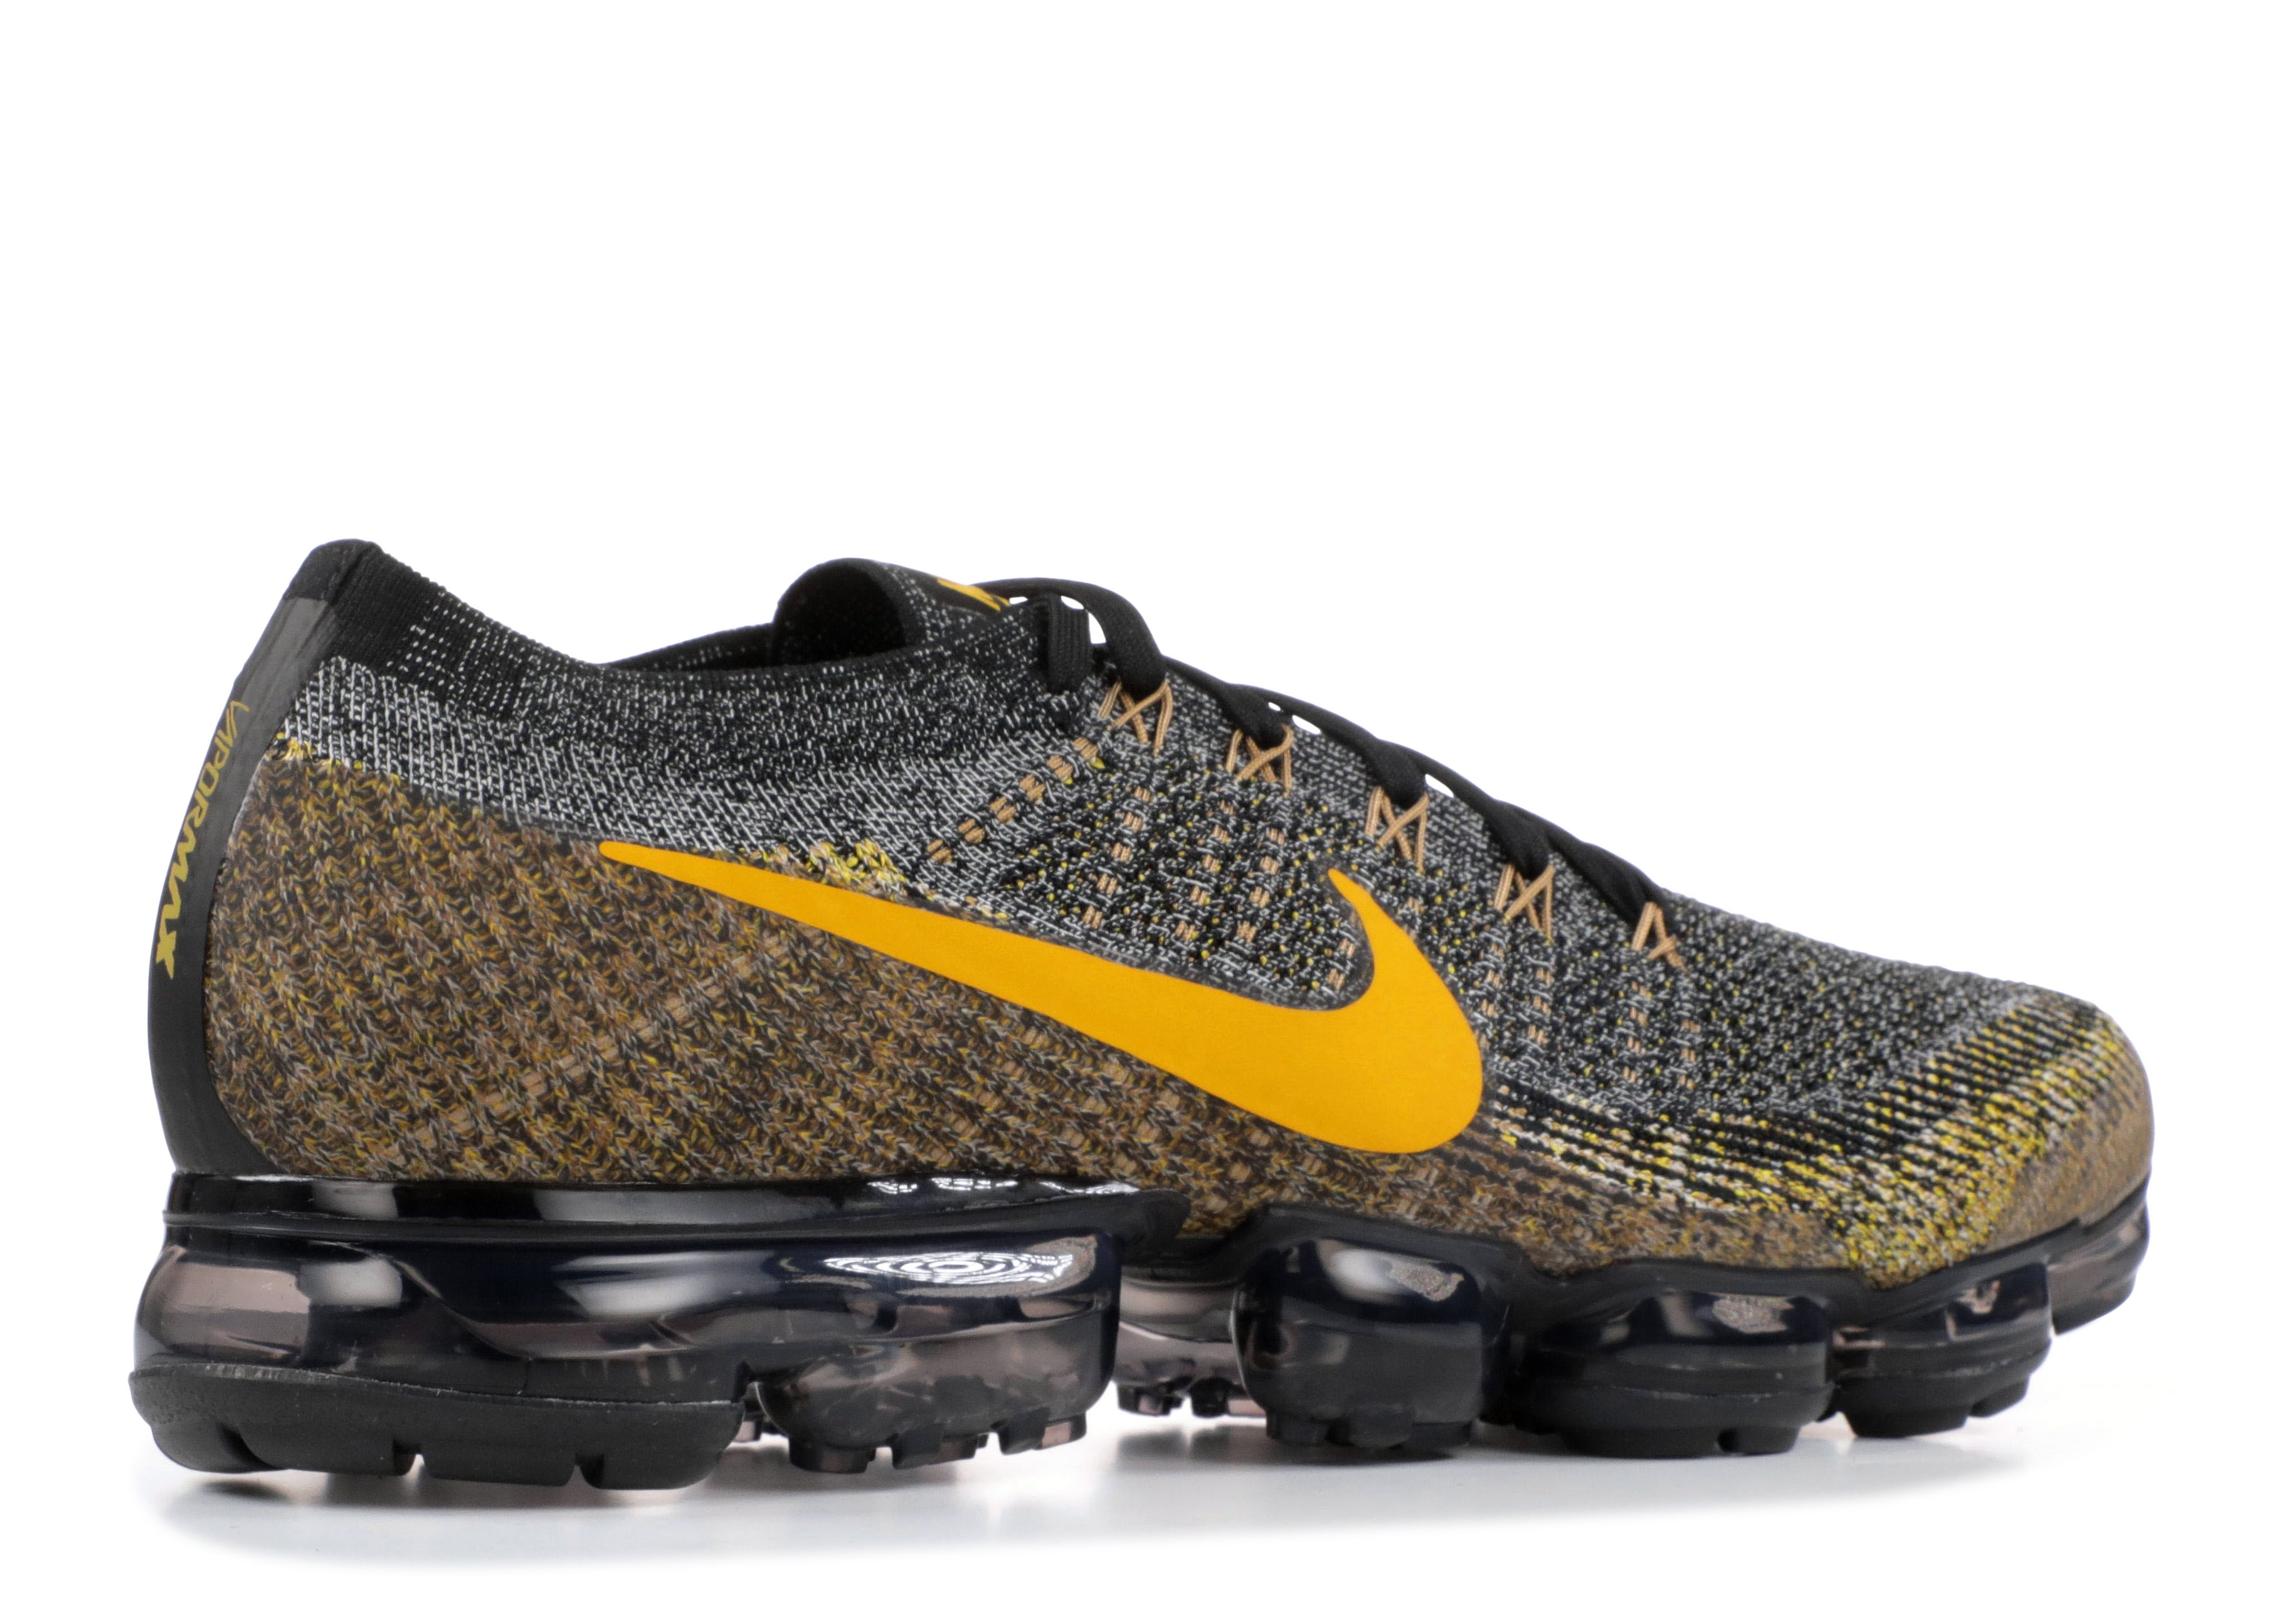 nike vapormax mineral gold